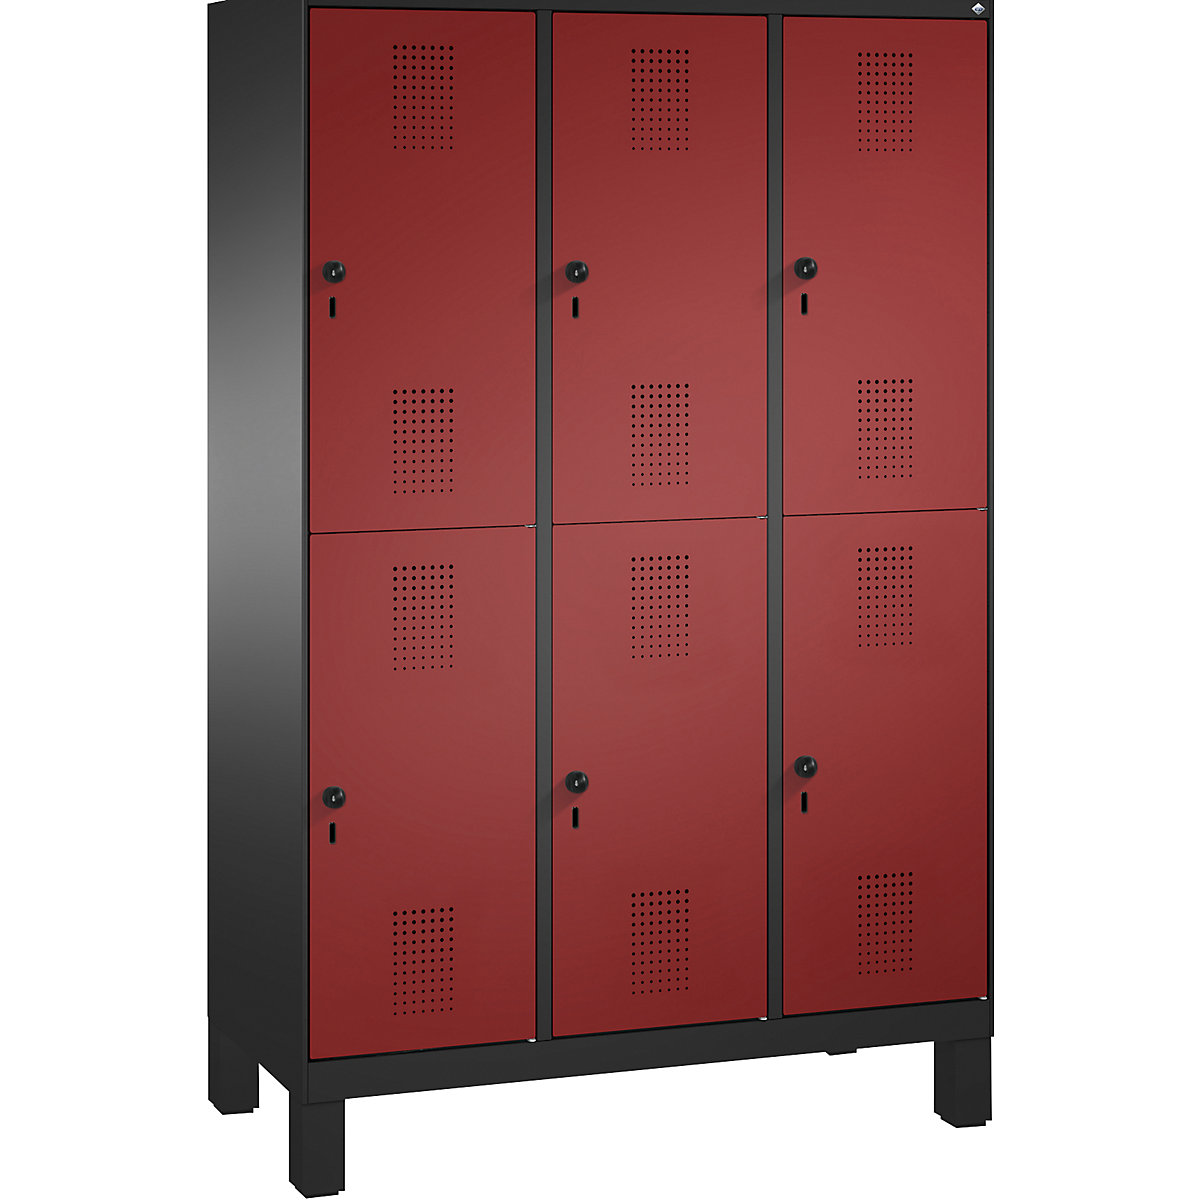 EVOLO cloakroom locker, double tier, with feet – C+P, 3 compartments, 2 shelf compartments each, compartment width 400 mm, black grey / ruby red-3